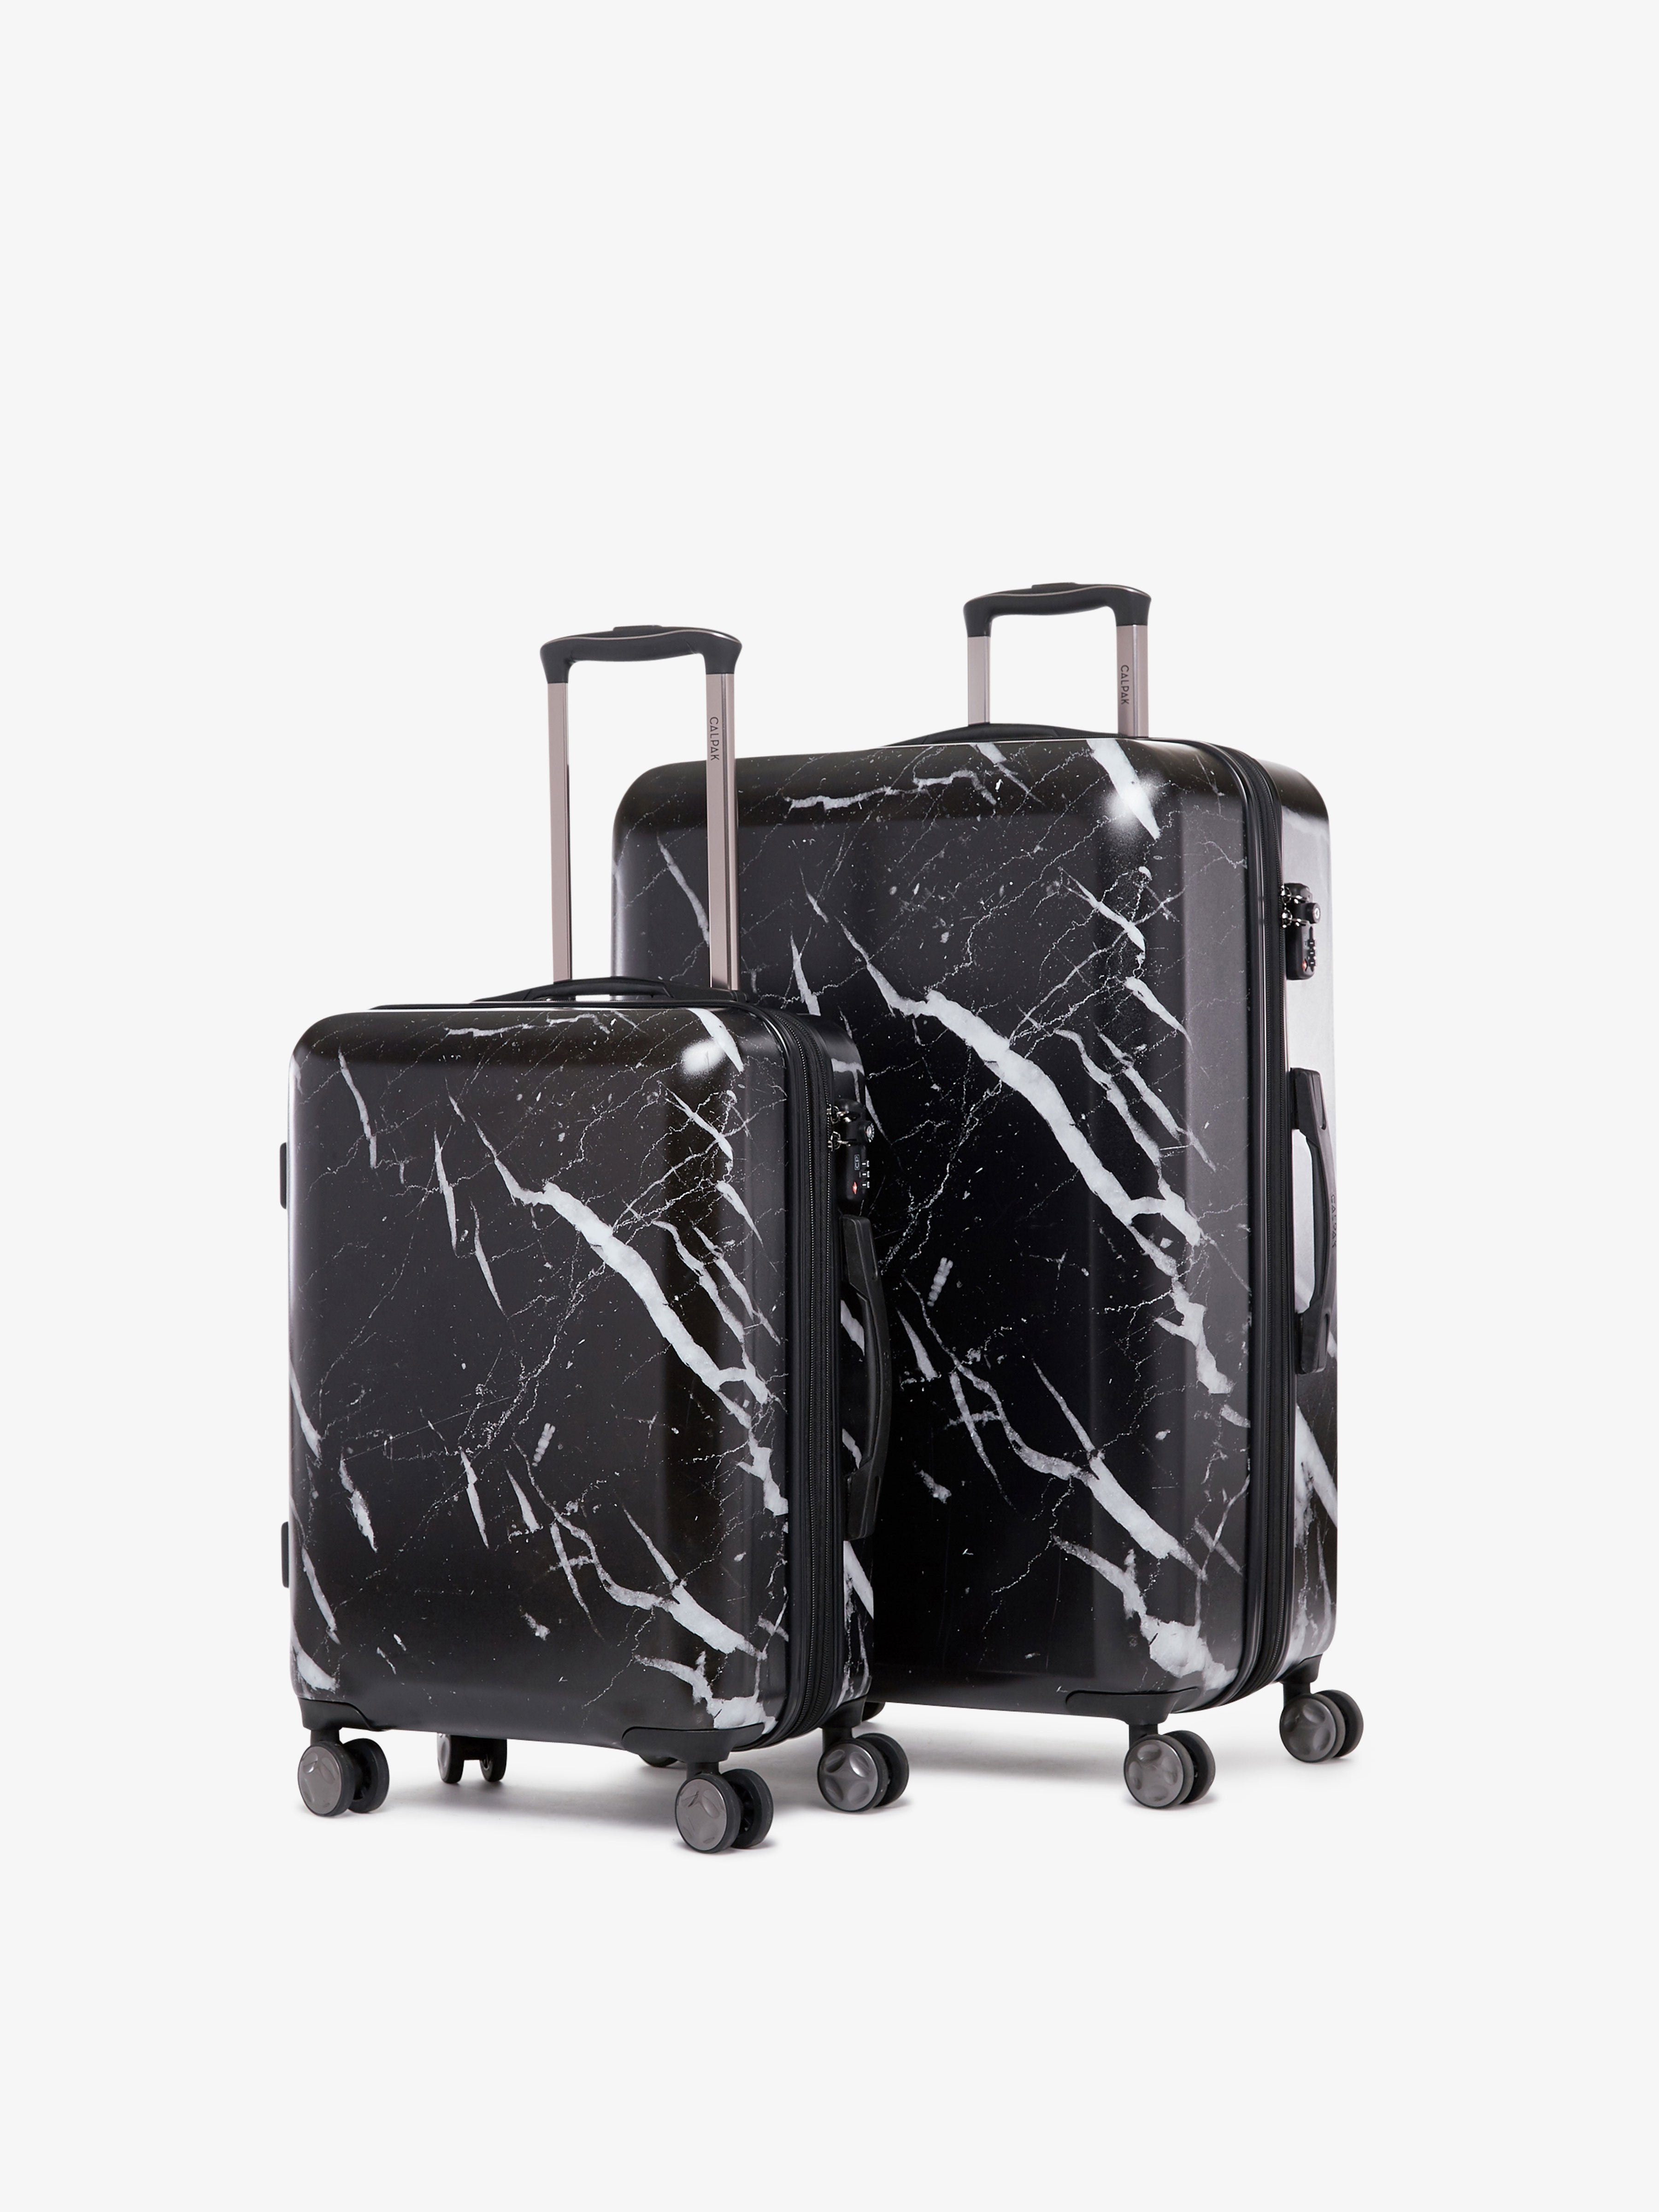 2 piece CALPAK Astyll black marble luggage set that includes a carry on and large suitcase